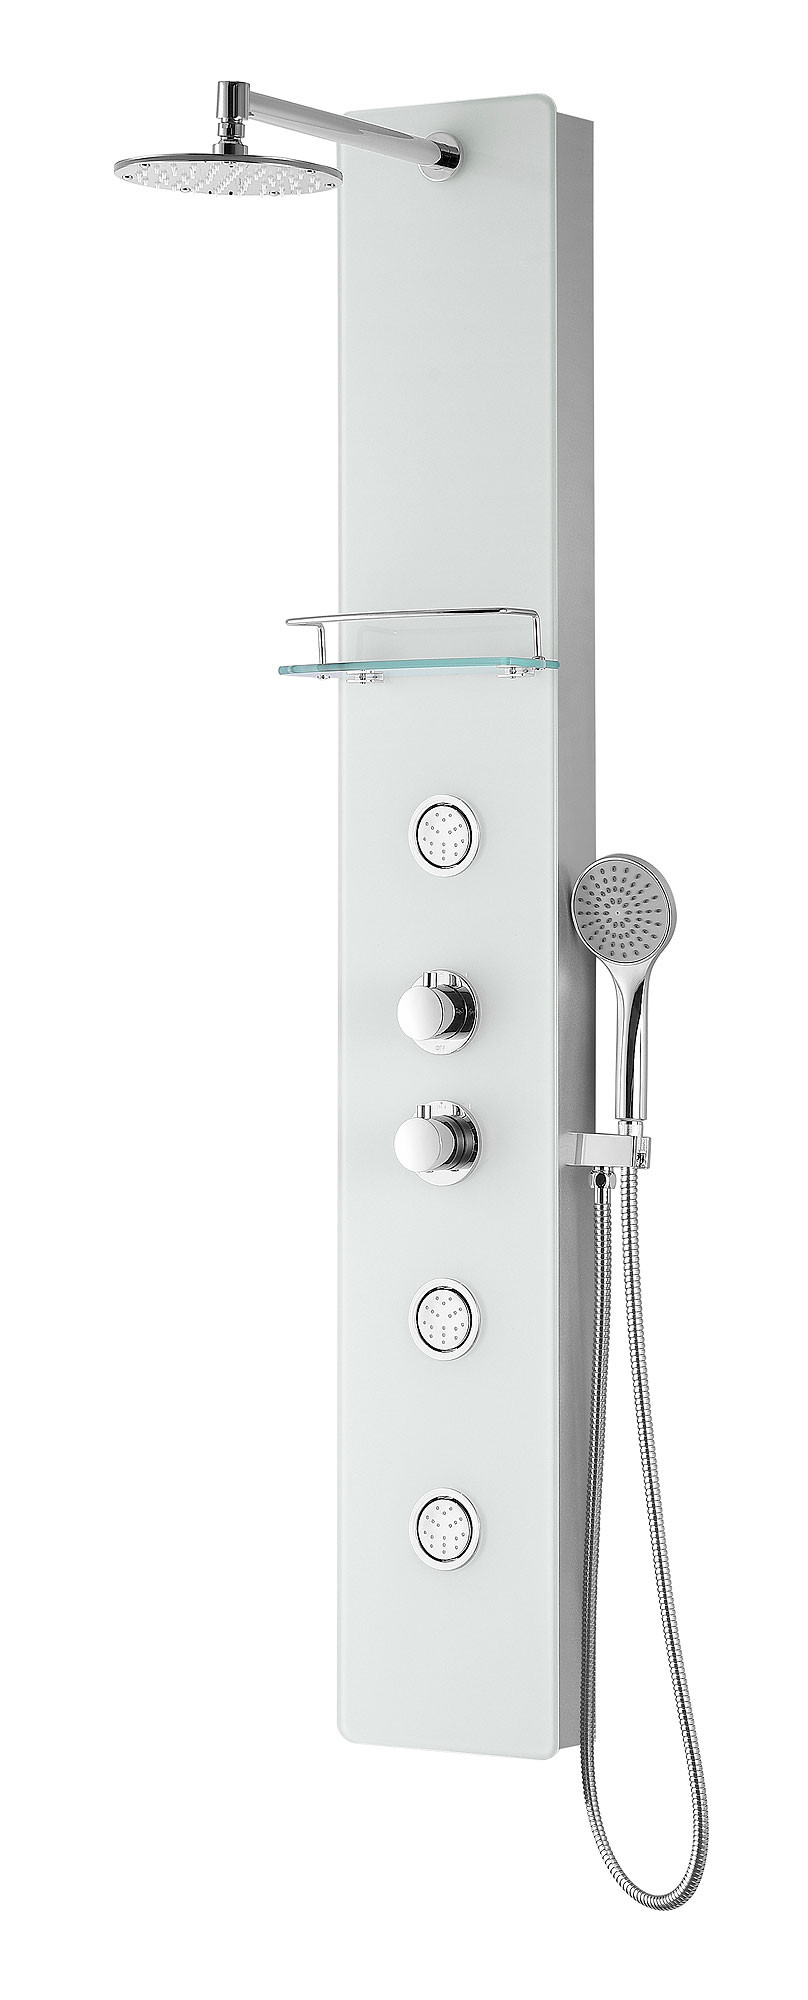 ANZZI SP-AZ052 Savannah Series Shower Panel System In White With Spray Wand